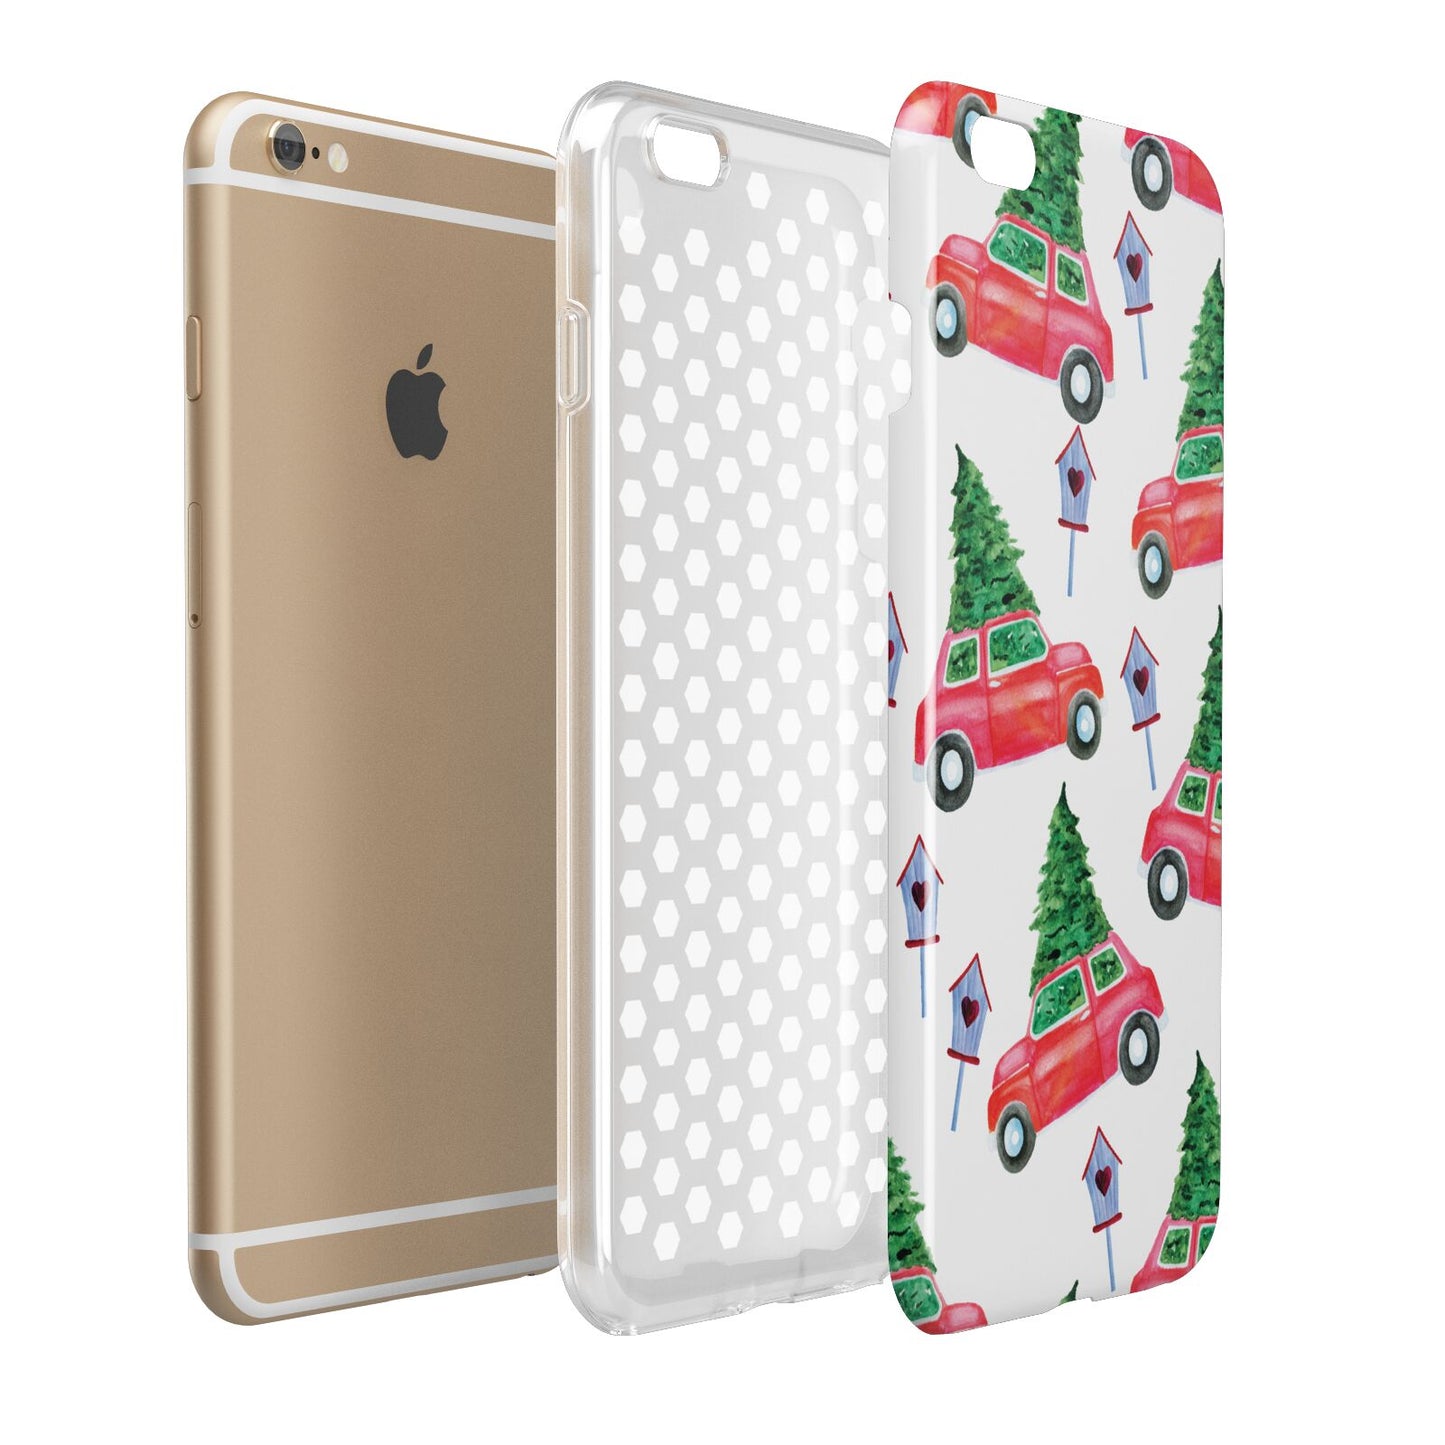 Driving home for Christmas Apple iPhone 6 Plus 3D Tough Case Expand Detail Image